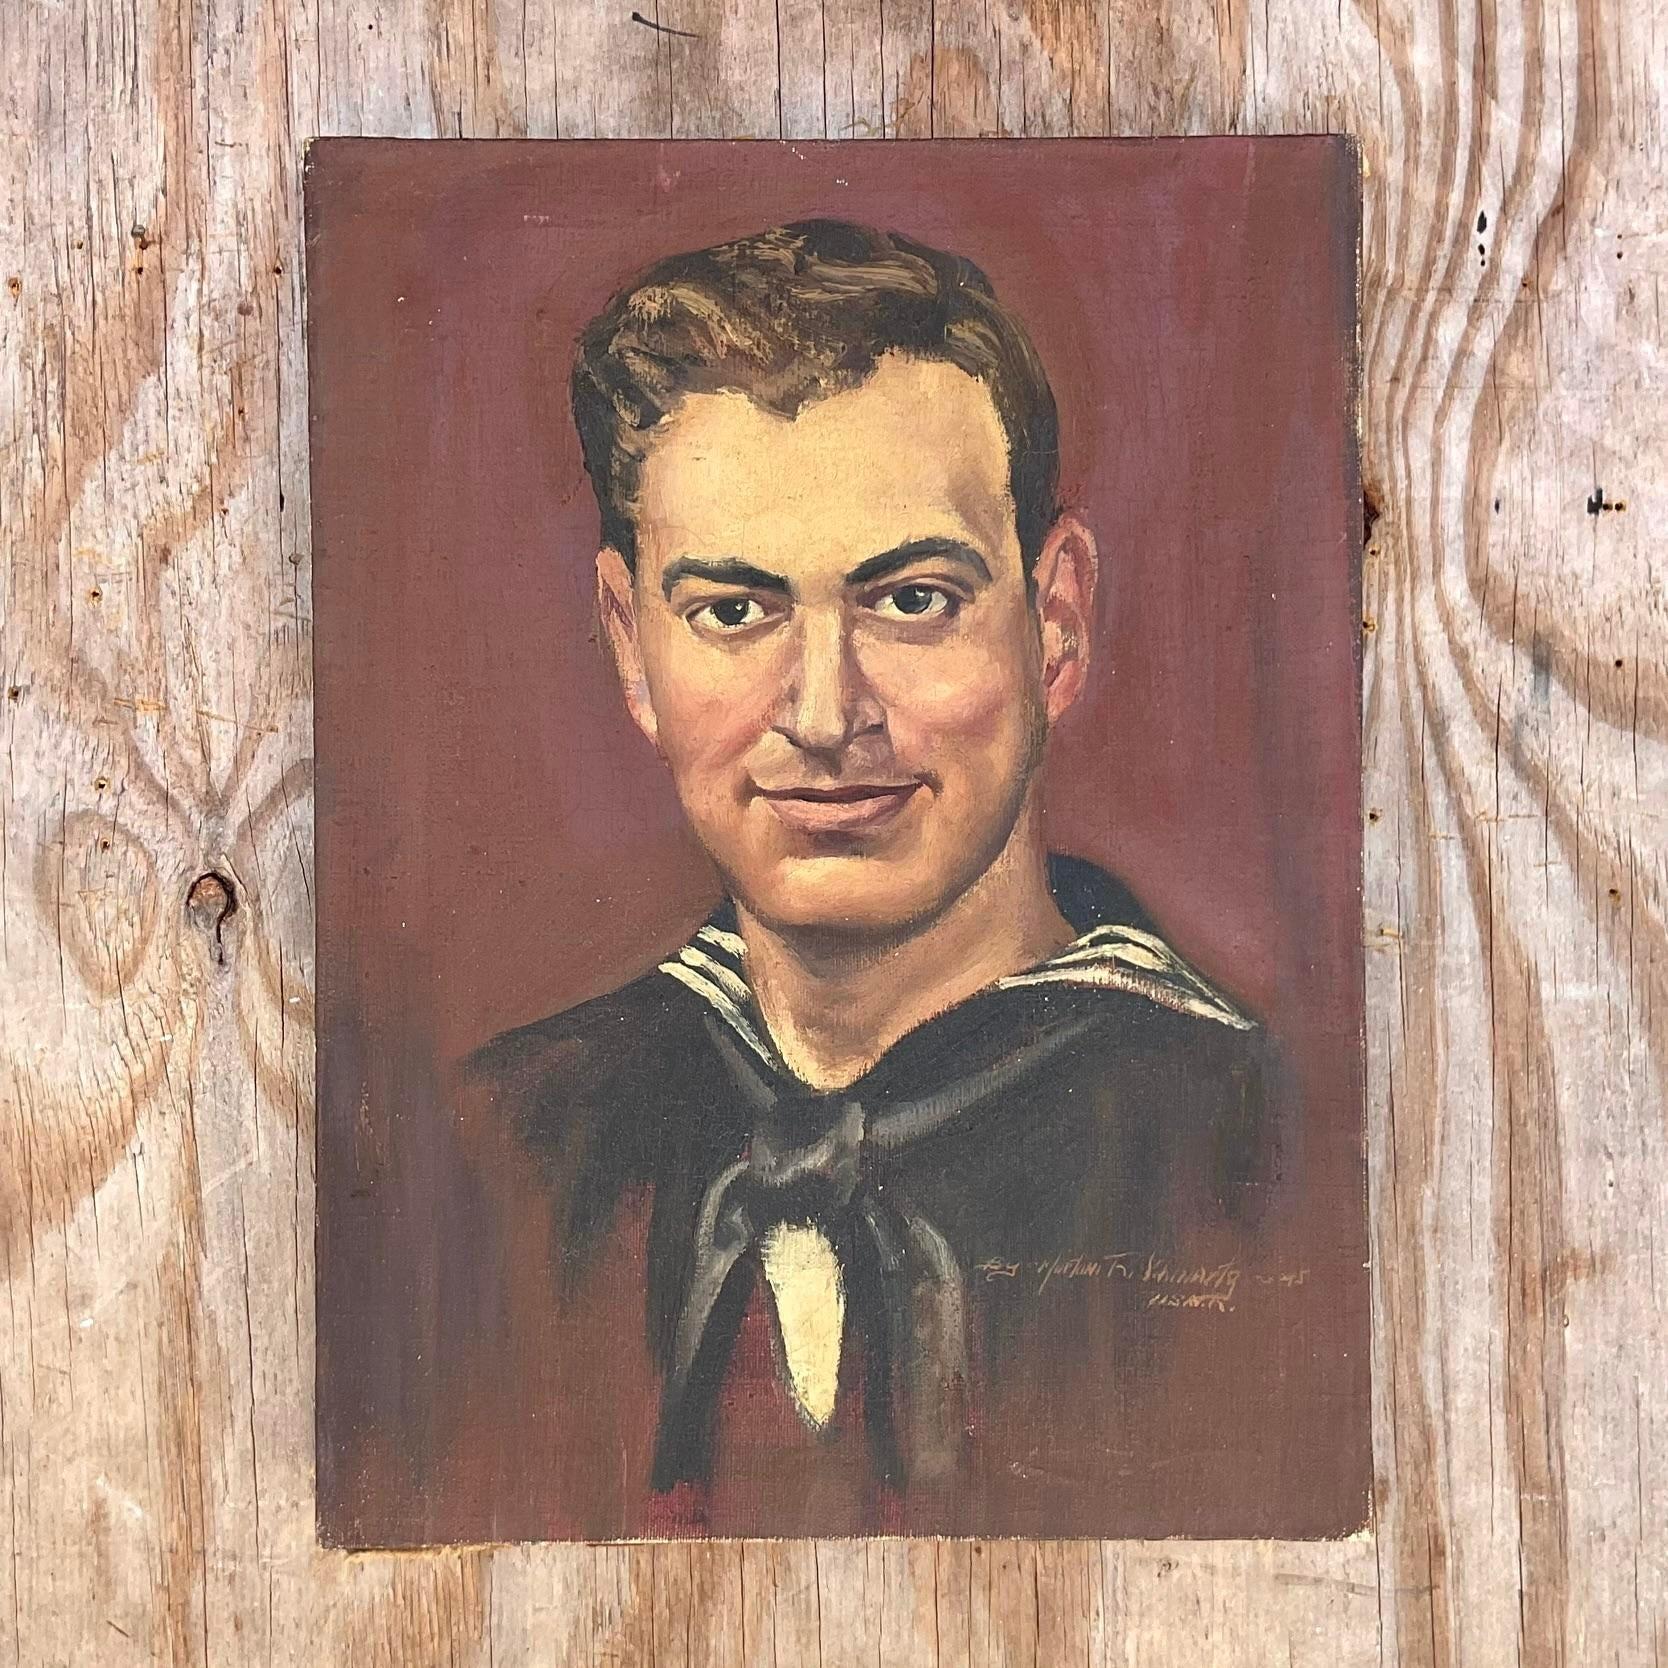 A fabulous vintage Boho Original oil painting on canvas. A chic 1945 portrait of a young solider. Signed and dated by the artist. Acquired from a Palm Beach estate.